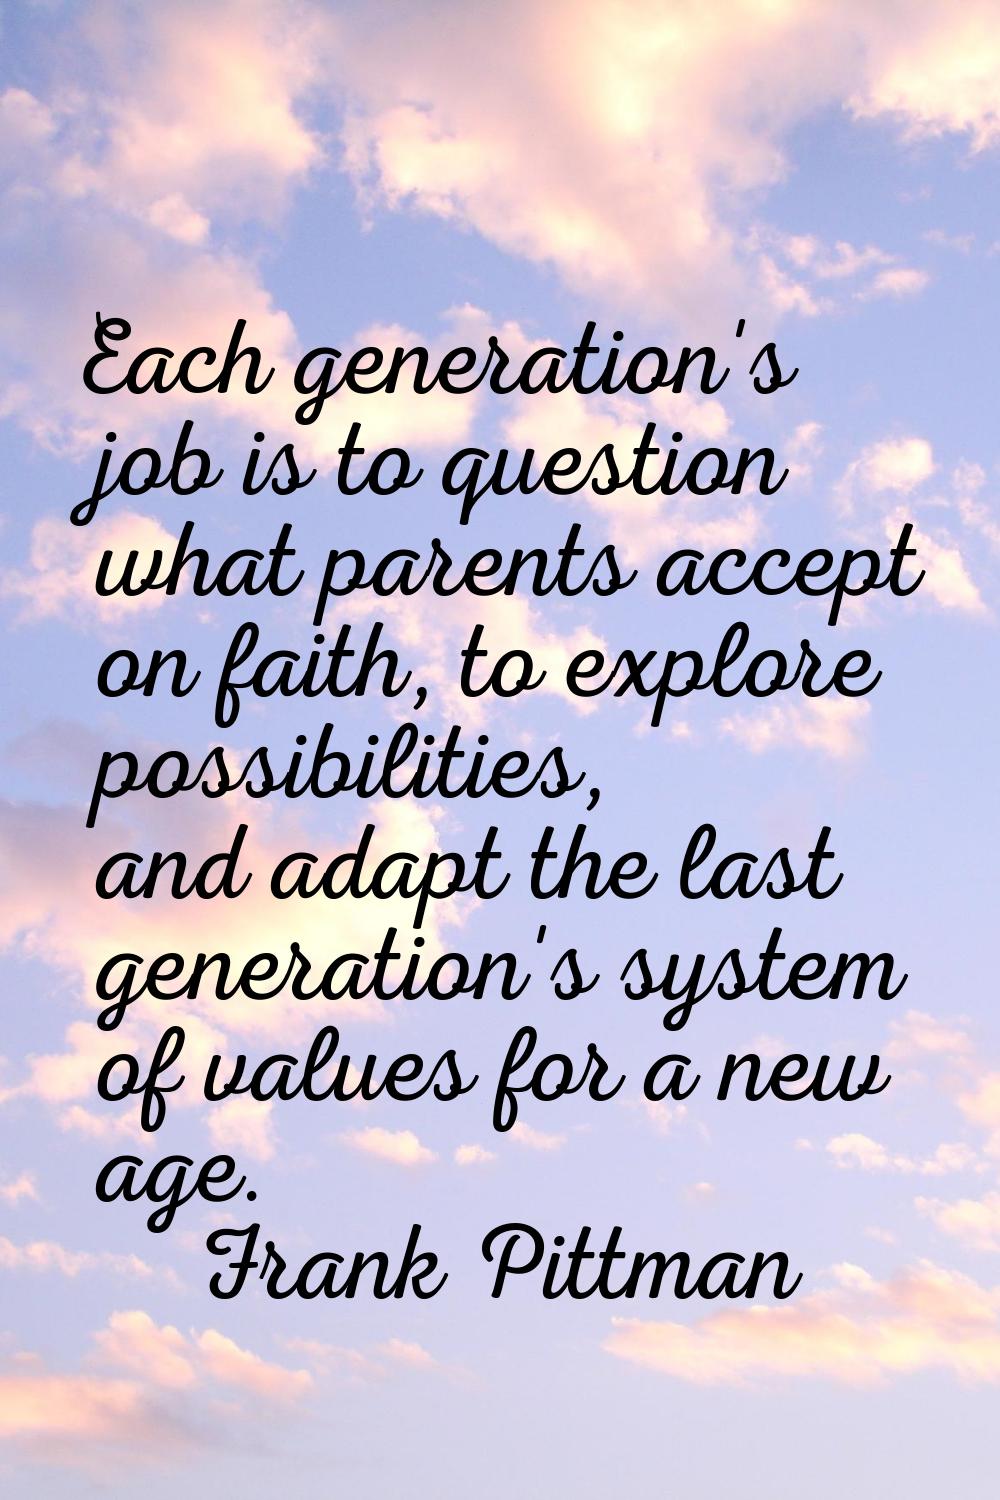 Each generation's job is to question what parents accept on faith, to explore possibilities, and ad